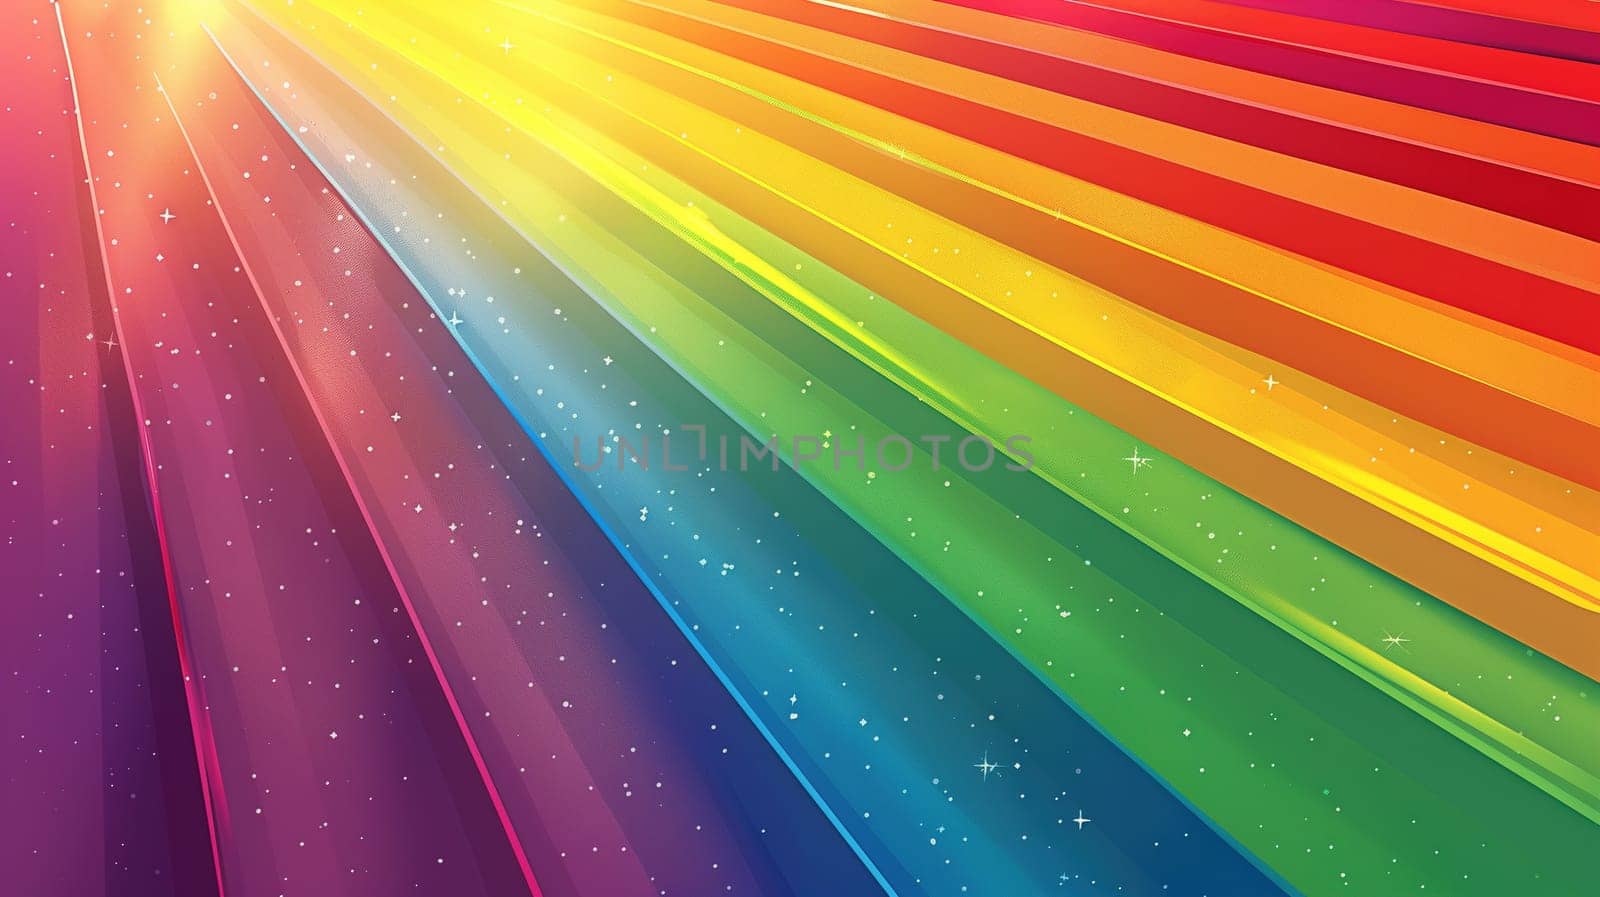 Rainbow Colored Background With Stars and Lines by TRMK